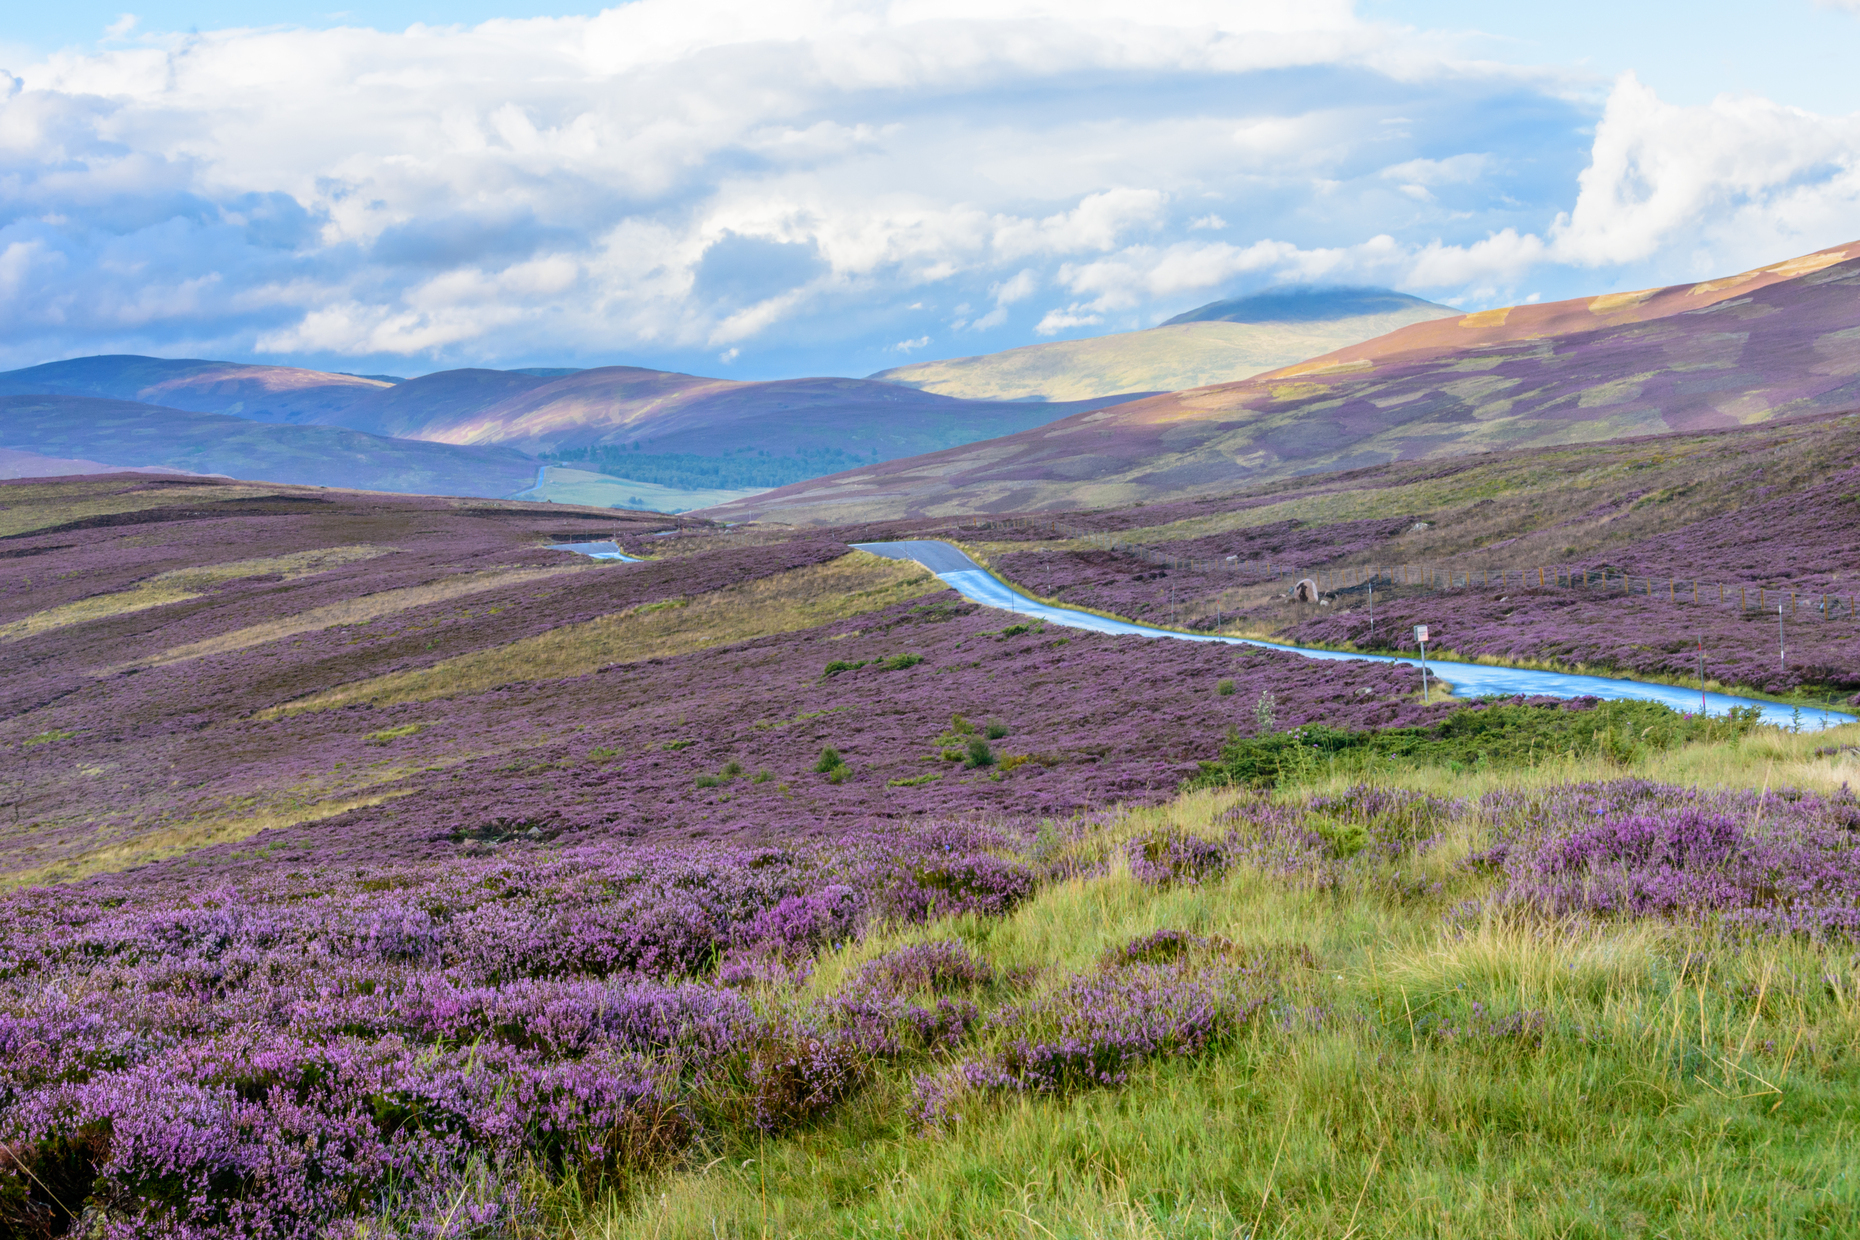 Covering more than 4,500 km<sup>2 </sup>(1,700 mi<sup>2</sup>), <a href="https://www.visitcairngorms.com/" rel="noreferrer noopener">Cairngorms</a> is the largest national park in the United Kingdom. You’ll find some of Scotland’s highest peaks, numerous sparkling lochs, and vast forests of native Caledonian pine. An ideal playground for water sports, cycling, and hiking, Cairngorms National Park is also home to <a href="https://www.visitcairngorms.com/listing/1534/balmoral-castle/" rel="noreferrer noopener">Balmoral</a>, the late Queen Elizabeth II’s favourite castle.